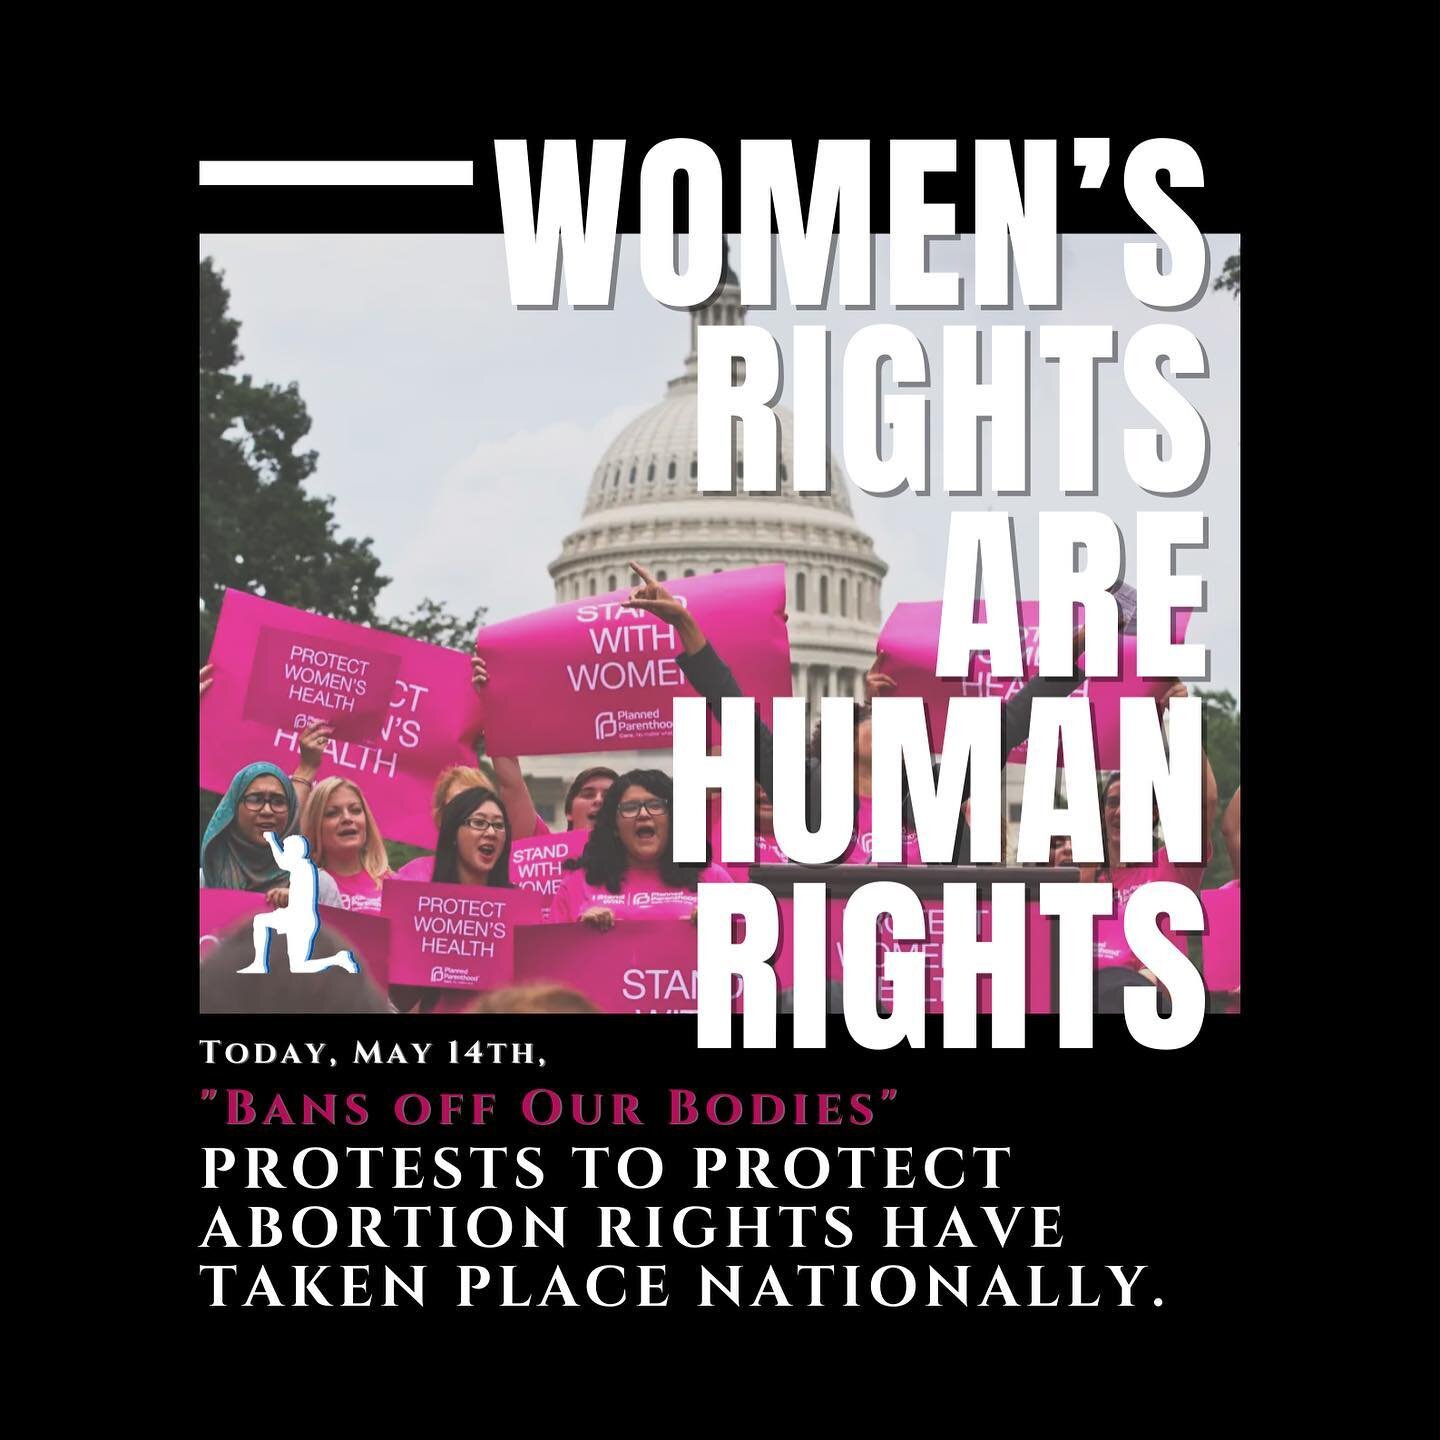 Today, May 14th, protests to protect Abortion Rights are taking place nationally📢

Protests were spearheaded by the #BansOffOurBodies Movement organized by many ally groups such as PPFA, PPAF, Planned Parenthood Federation of America, UltraViolet, W